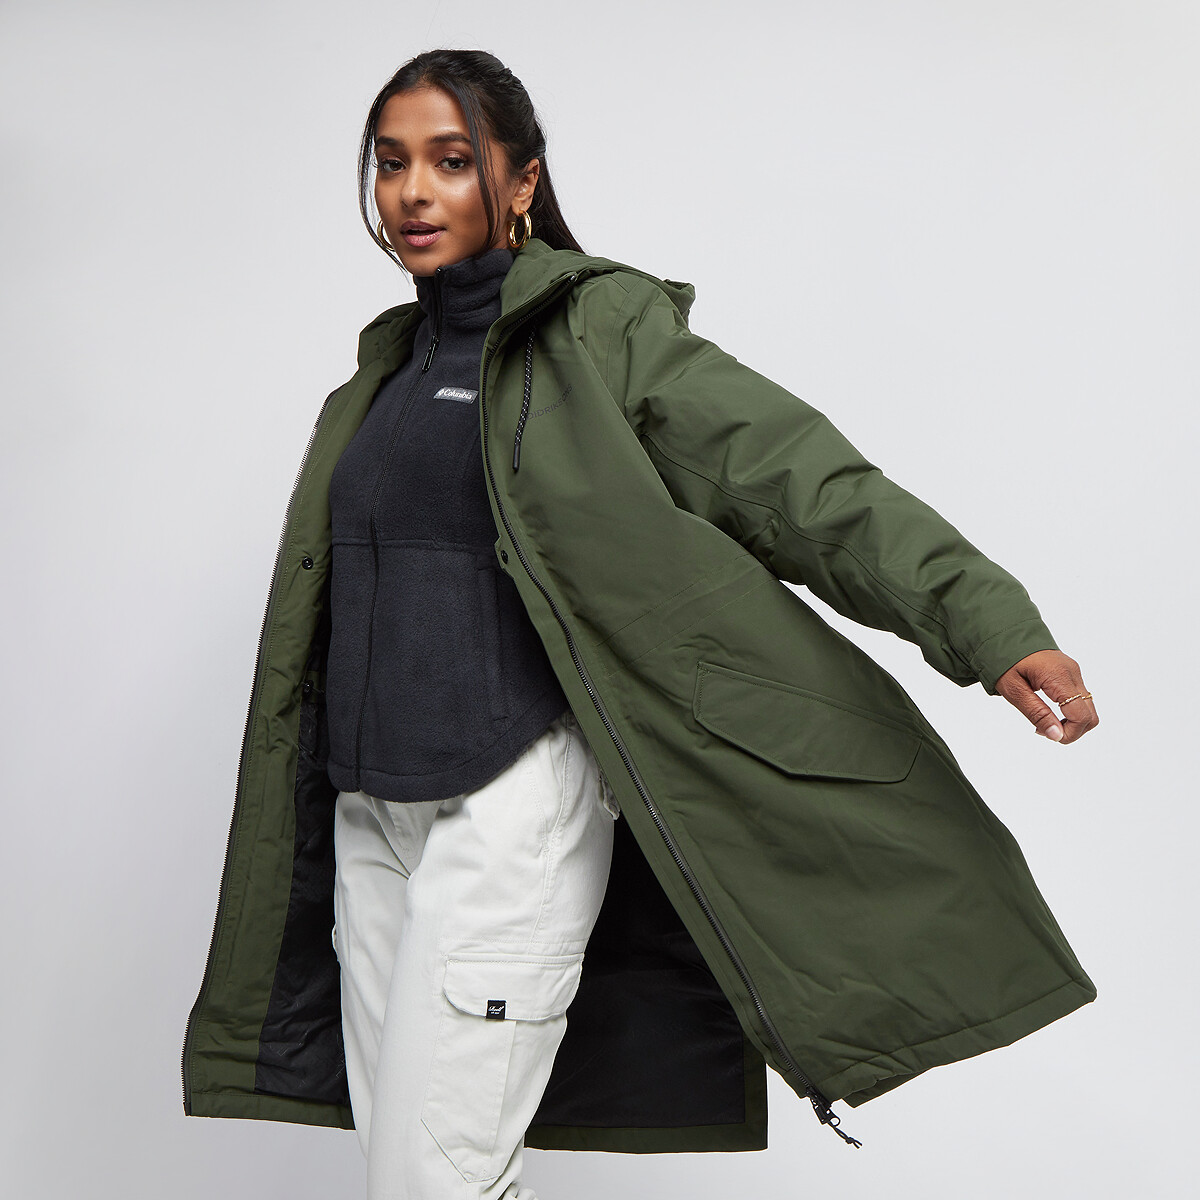 Best £100.00 Didriksons deep Deals green Parka from Marta-Lisa – (Today) Buy on